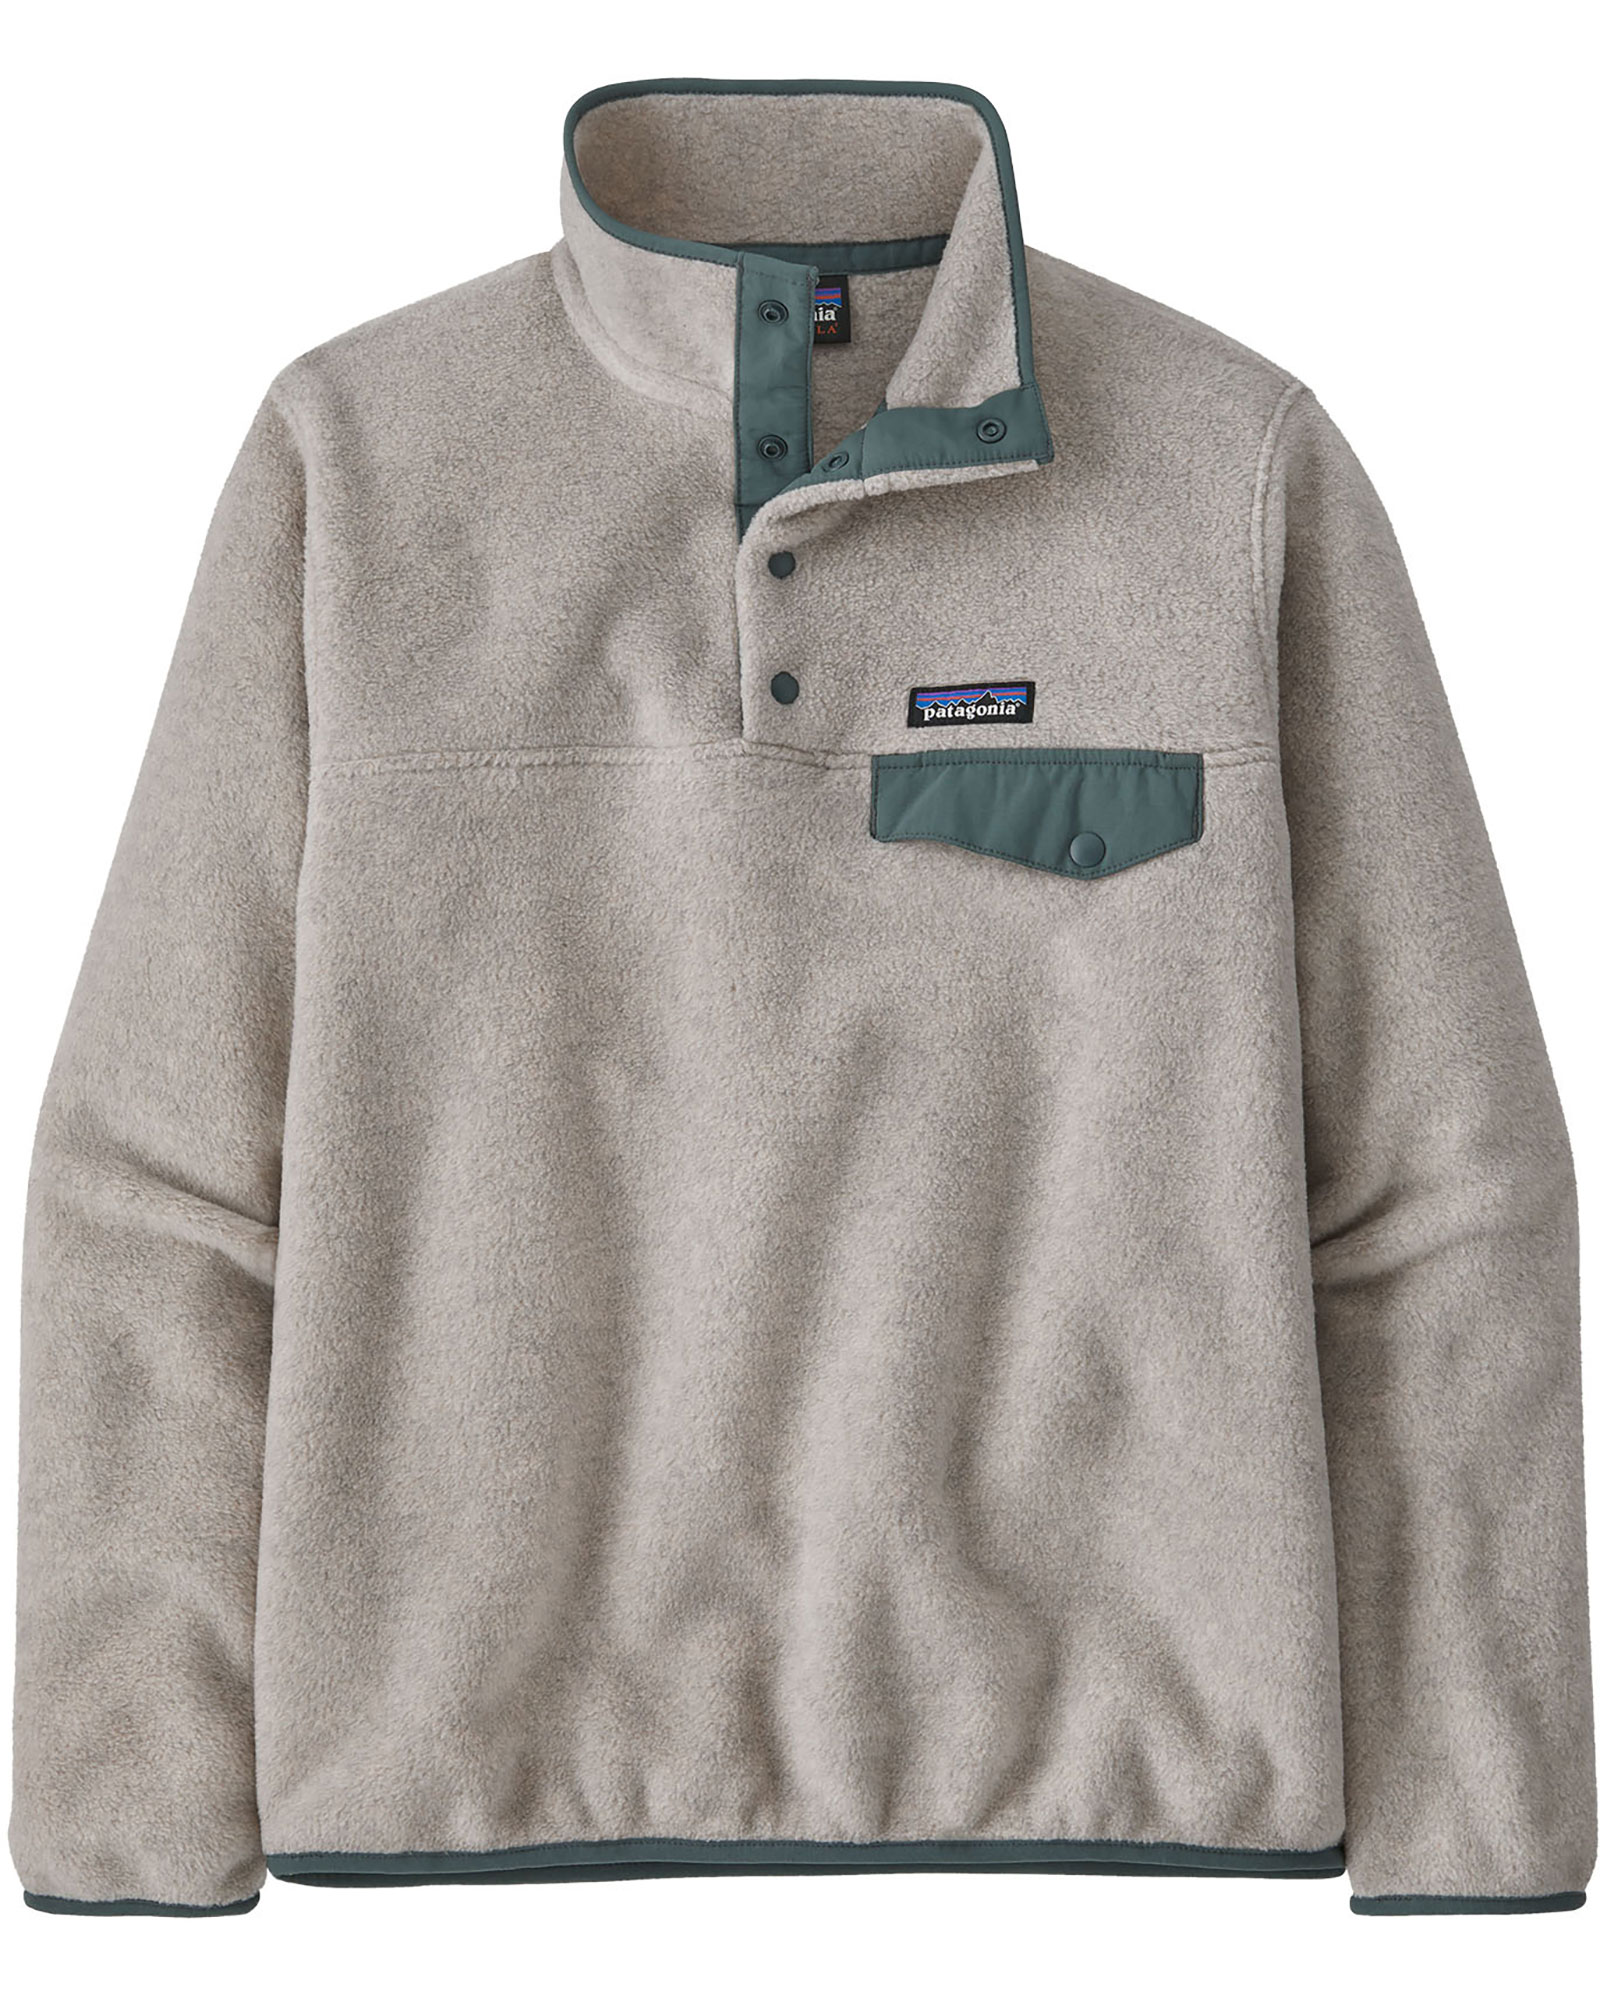 Patagonia Lwt Synchilla Women’s Snap T Pullover - Oatmeal Heather w/Nouveau Green S